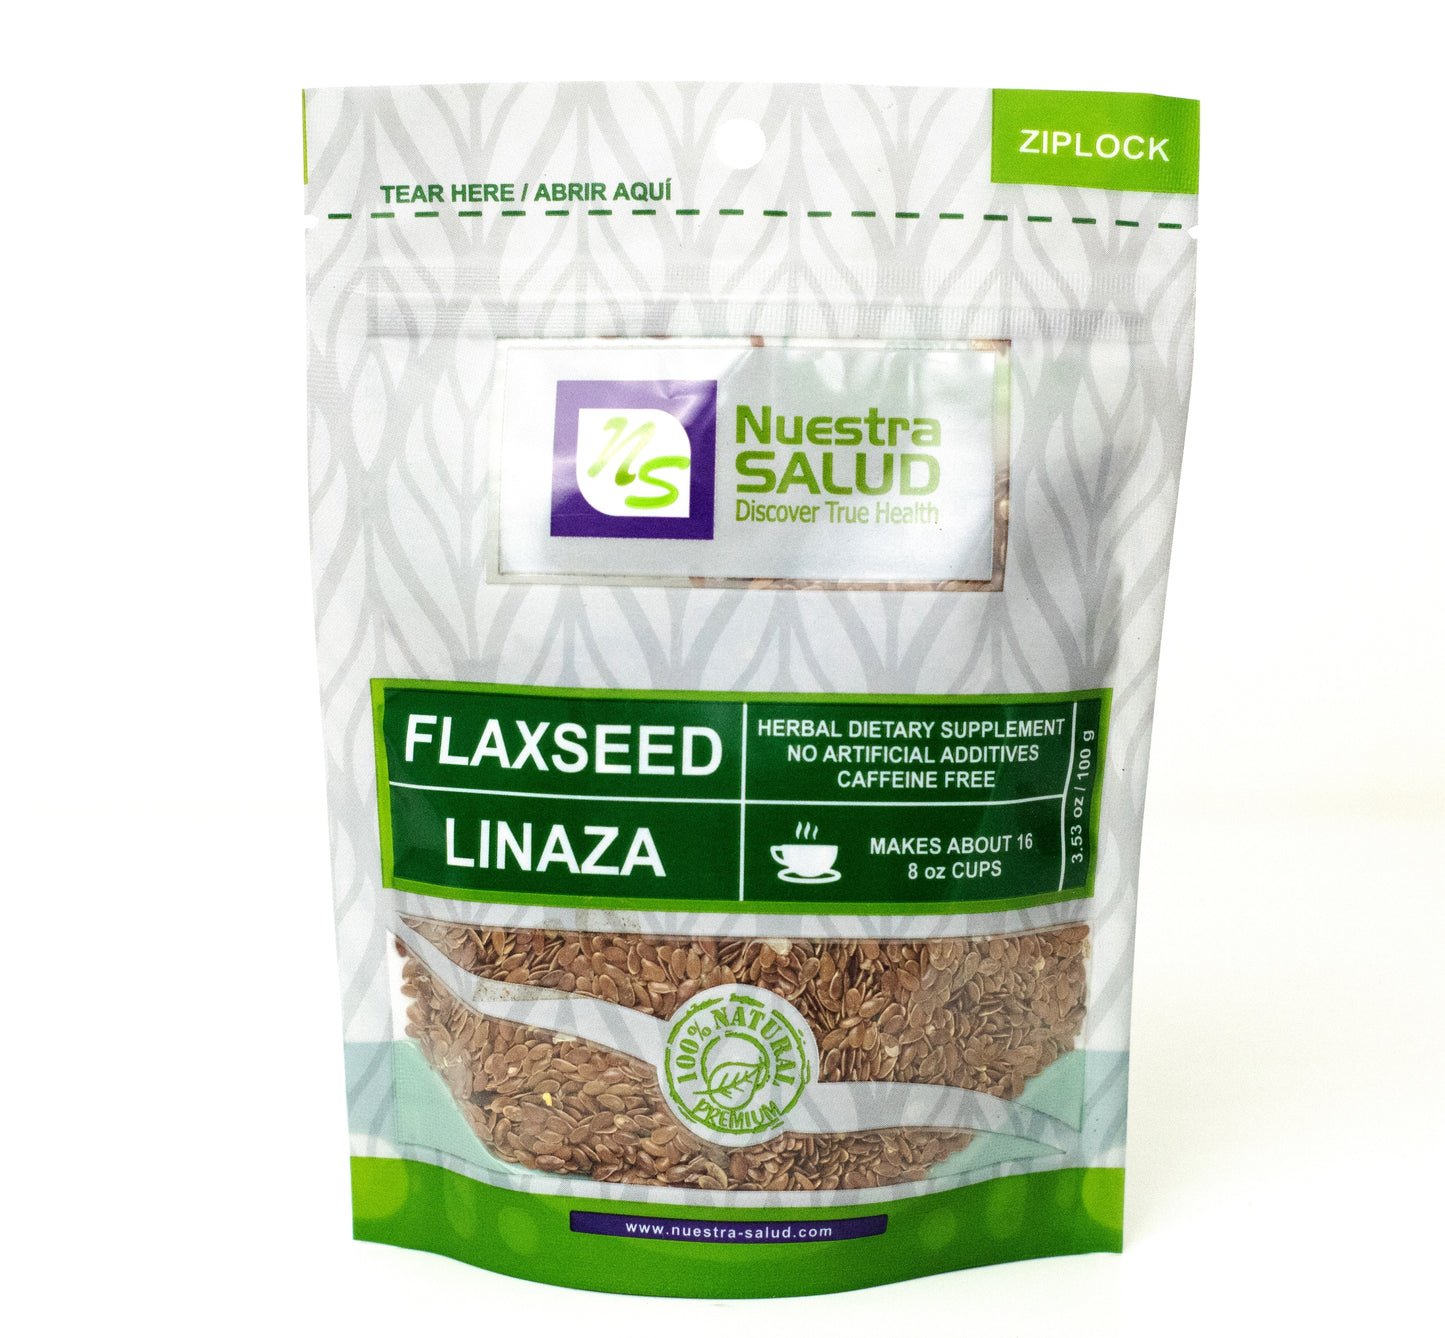  Linaza Flax Seed Omega Herbal (100g) by Nuestra Salud sold by NS Herbs Co.